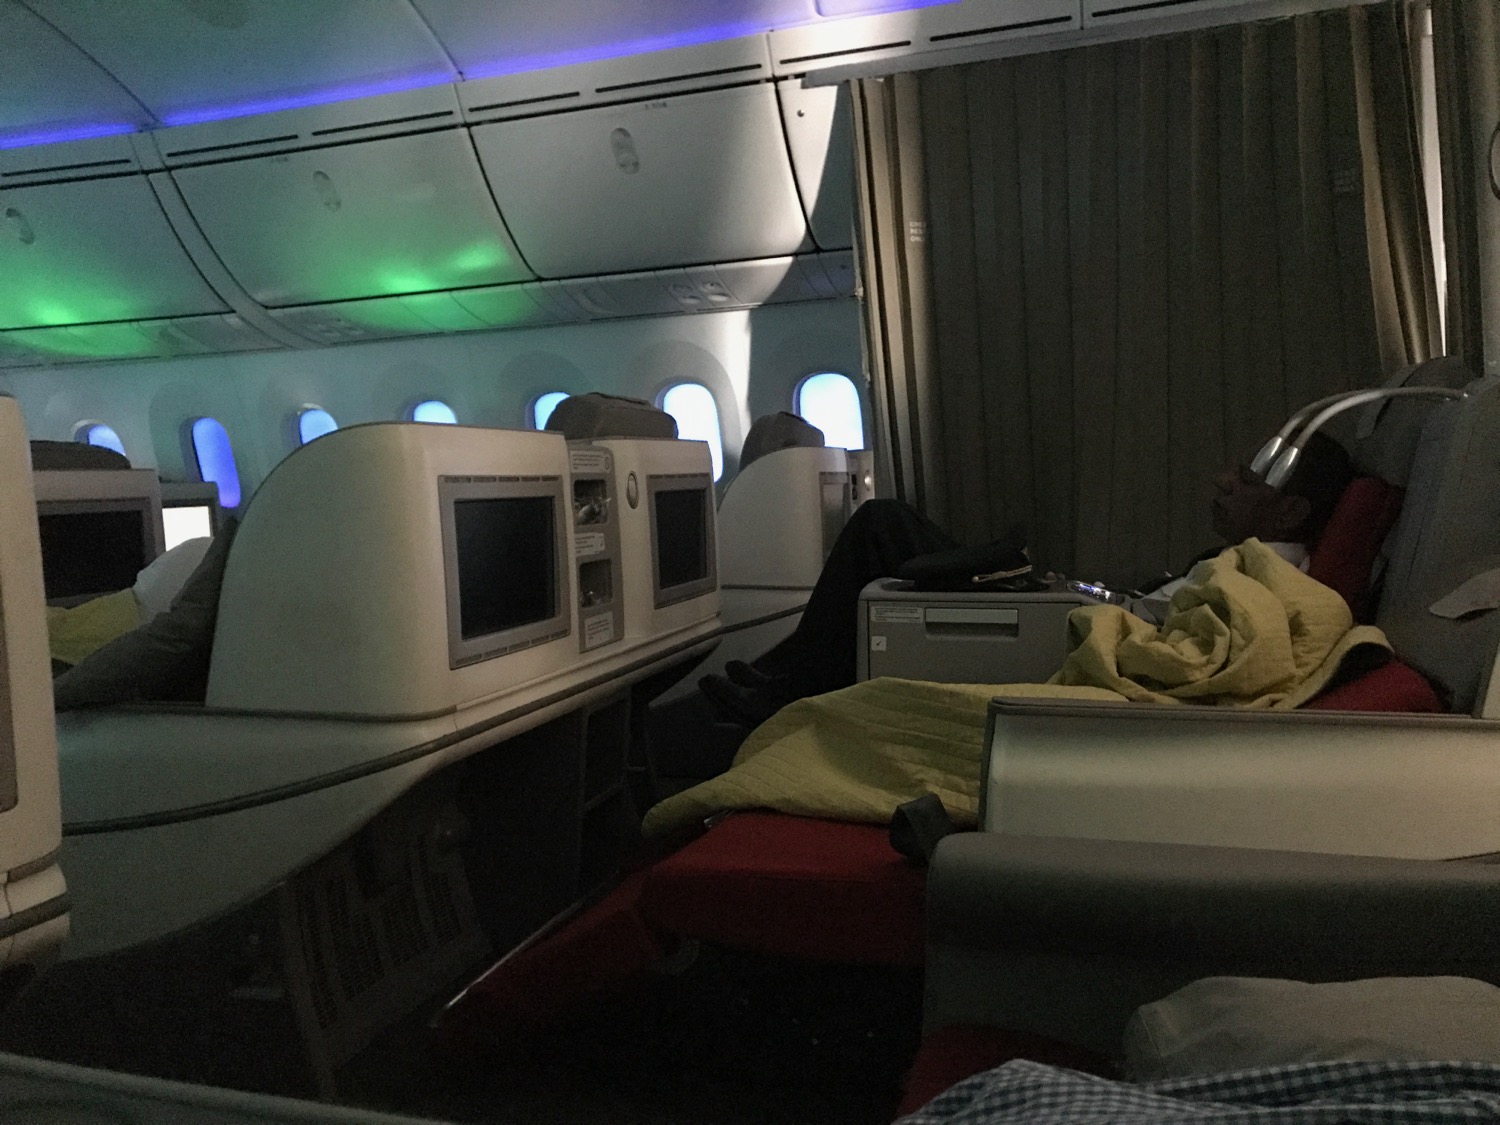 a person in a silver helmet on a bed in an airplane